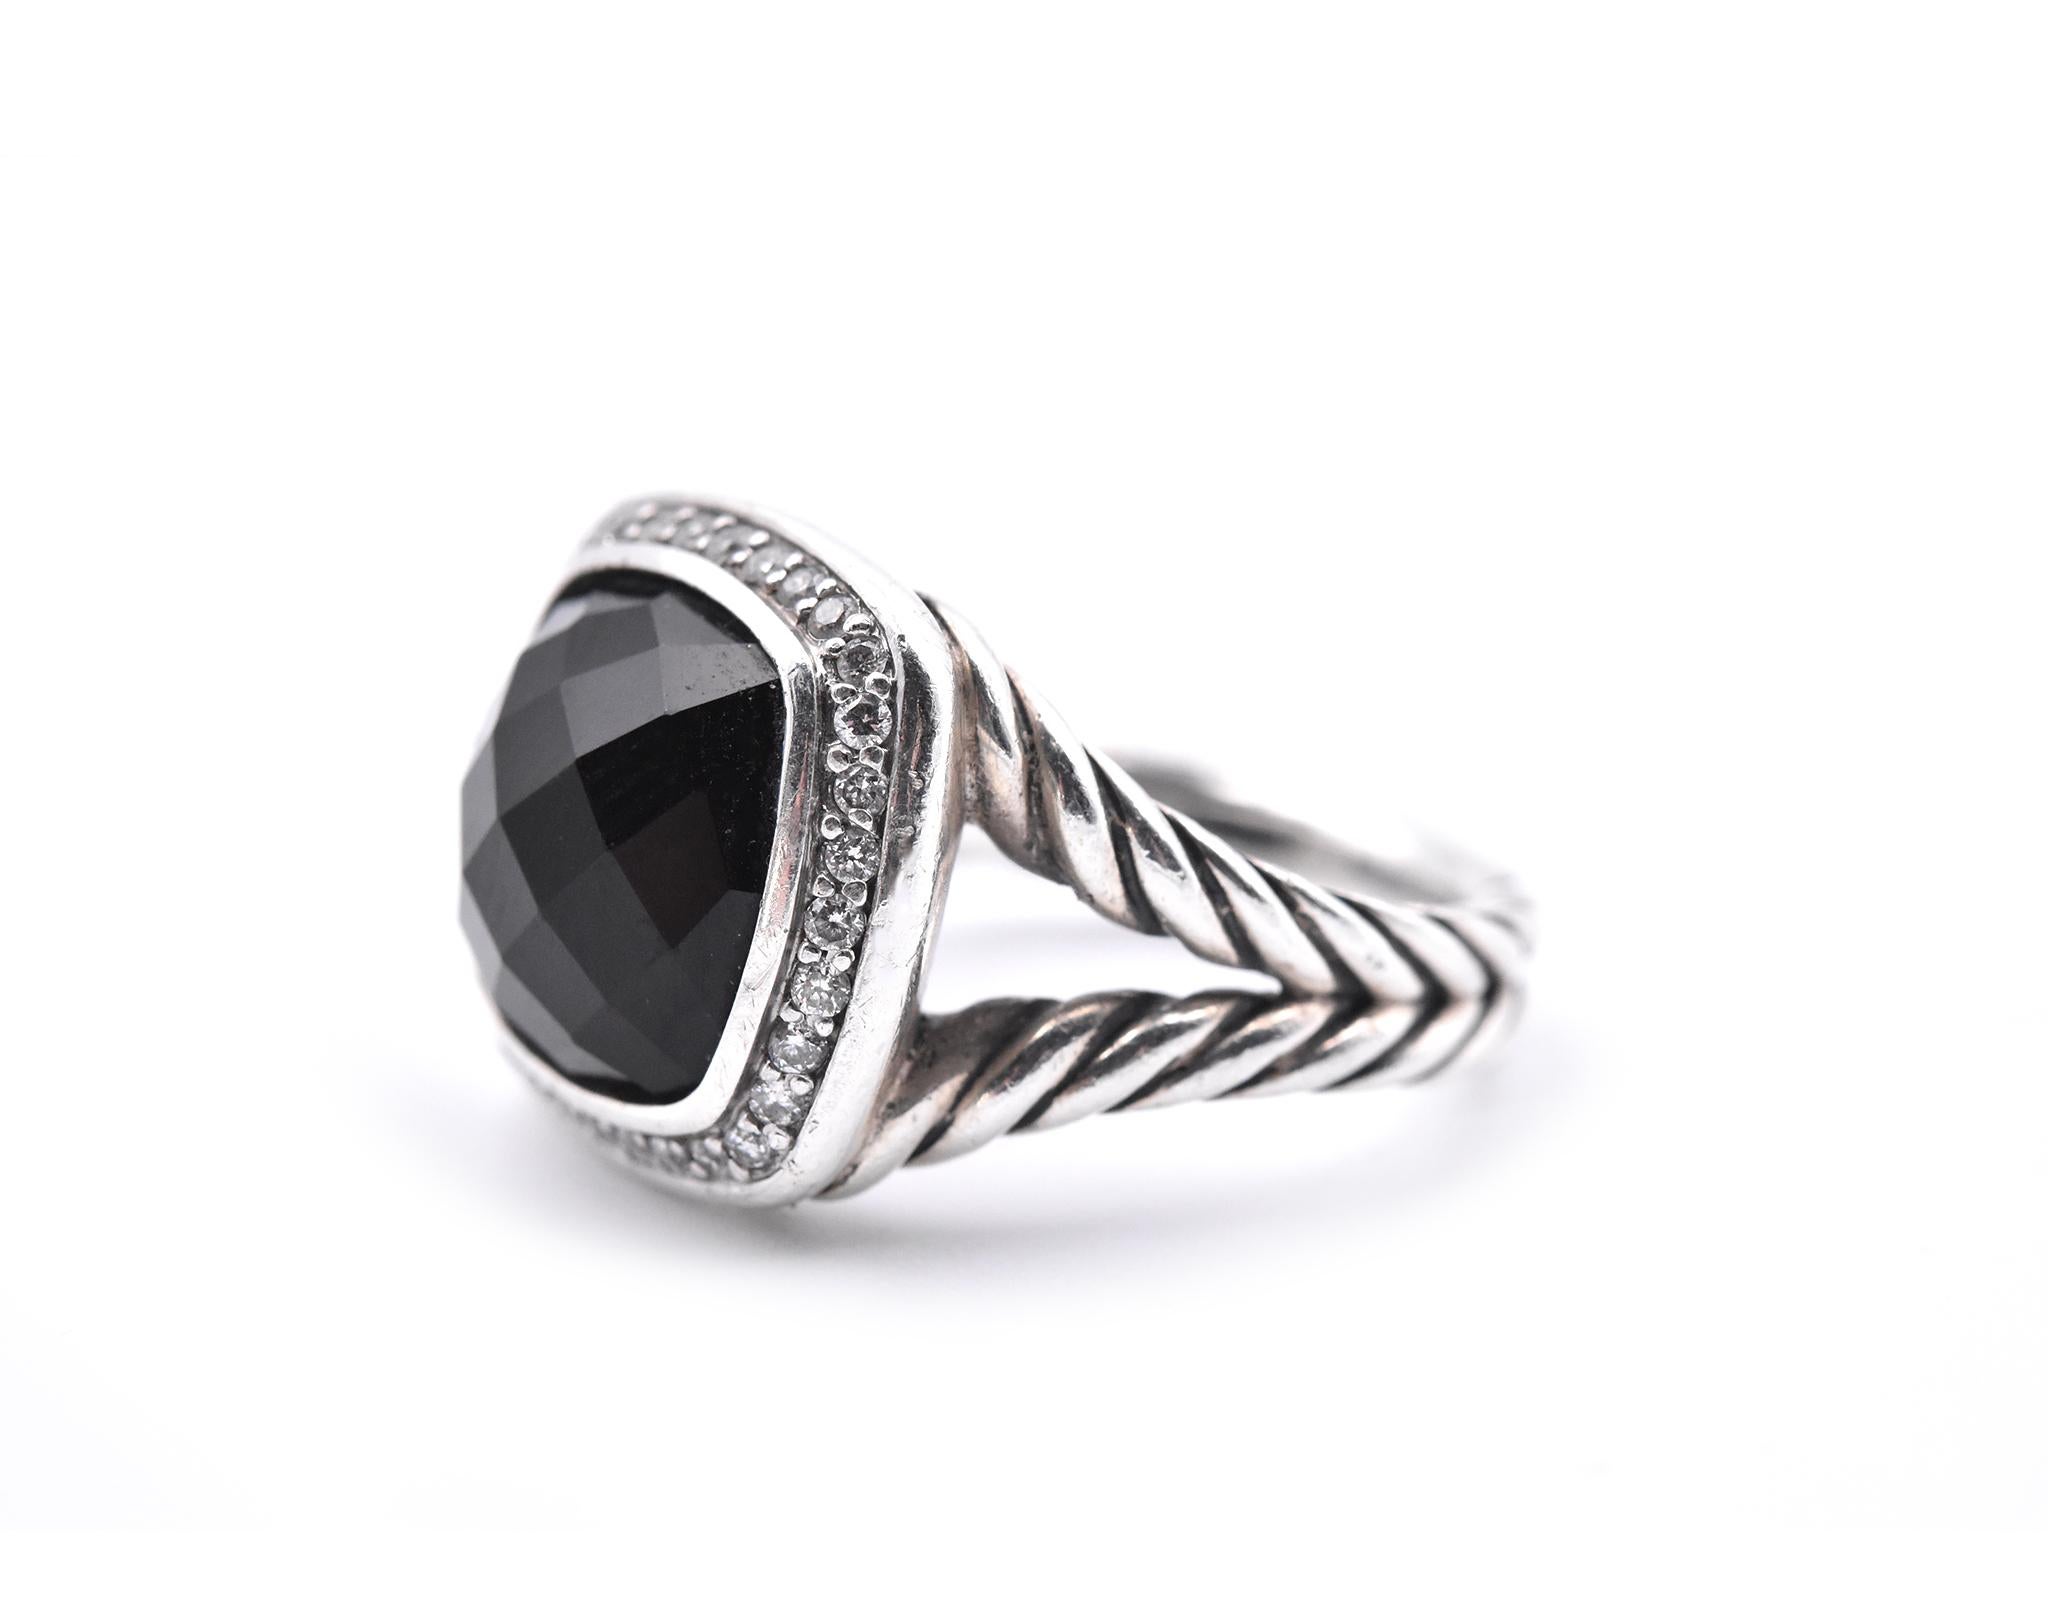 Designer: David Yurman
Material: sterling silver
Center Stone: faceted black onyx
Accent Diamonds: 32 round brilliant cuts = 0.22cttw
Dimensions: ring top measures approximately 15.15mm x 15.15mm
Weight: 8.72 grams
